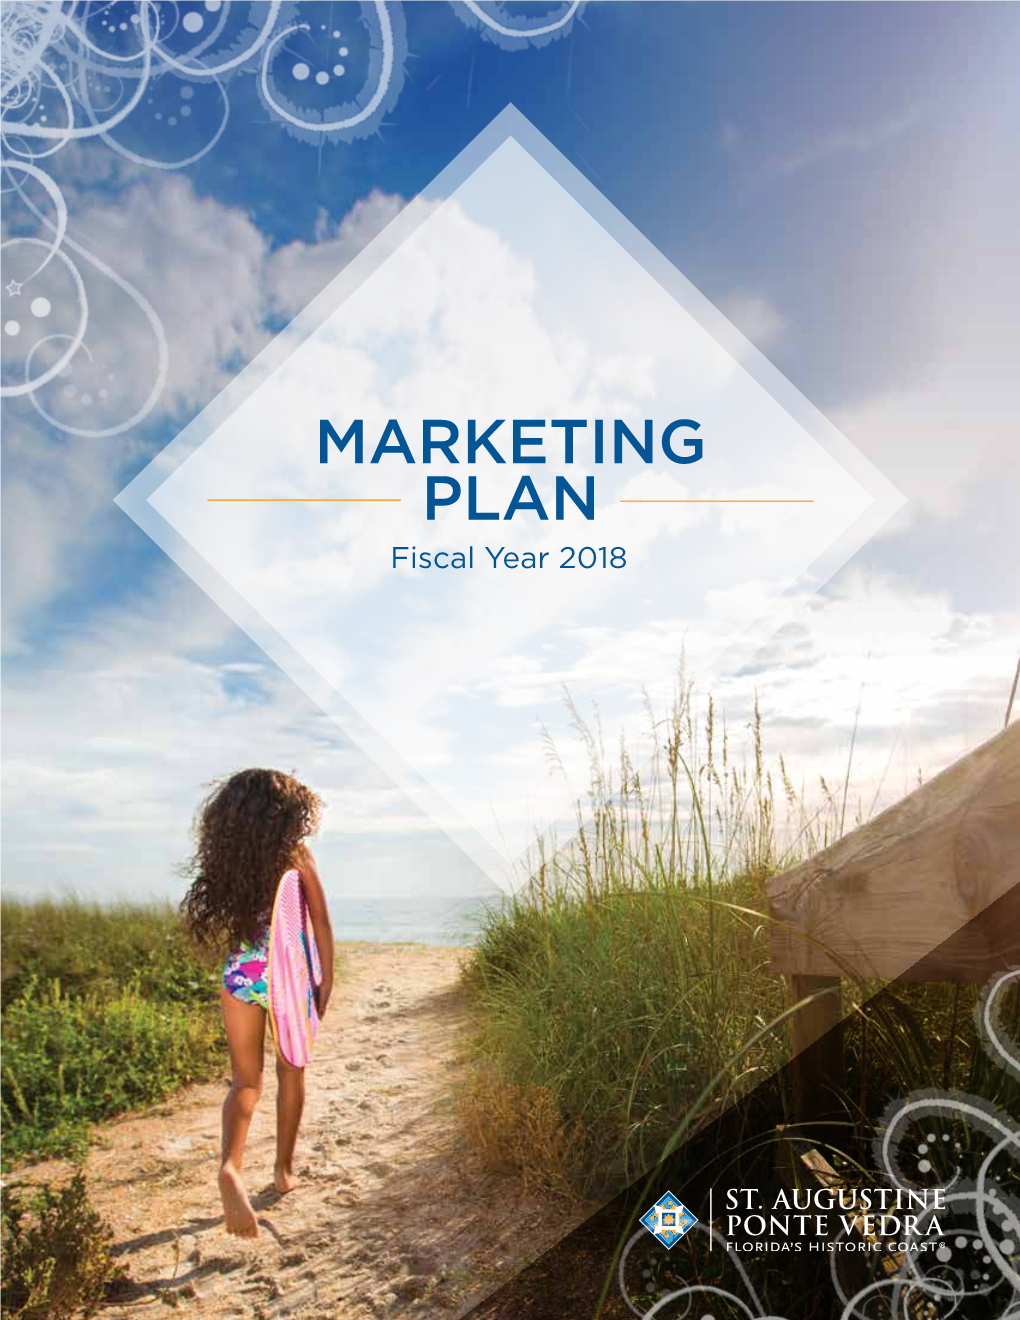 MARKETING PLAN Fiscal Year 2018 1 51 88 INTRODUCTION SALES PROMOTIONS